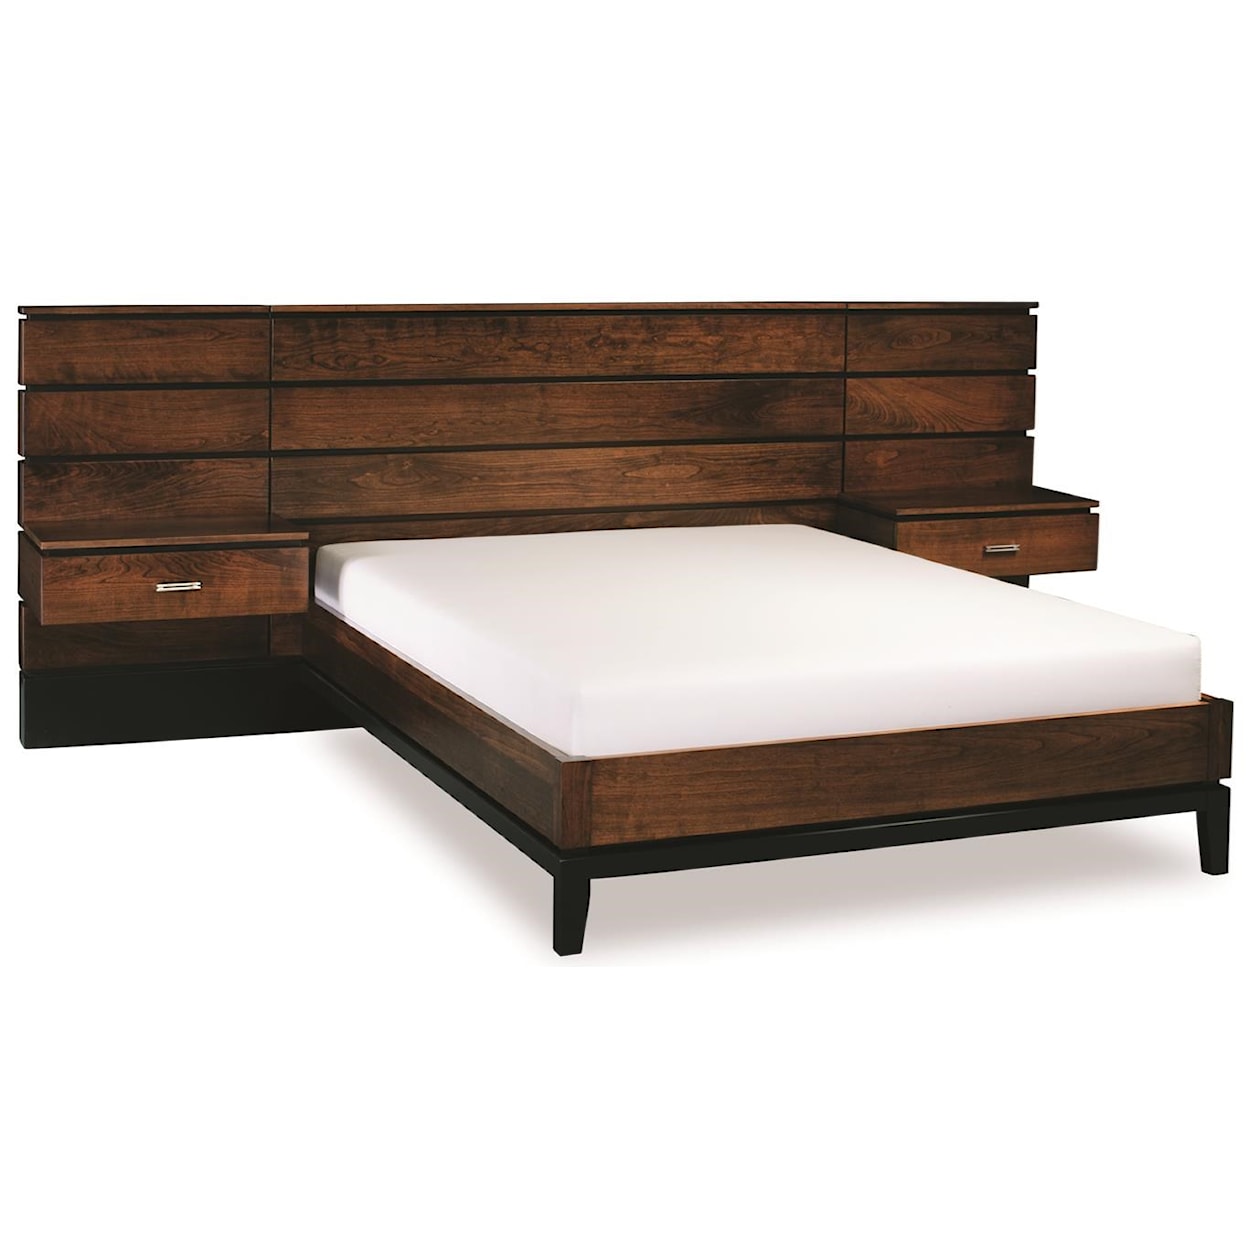 Simply Amish Frisco Queen Panel Bed with Attached Nightstands